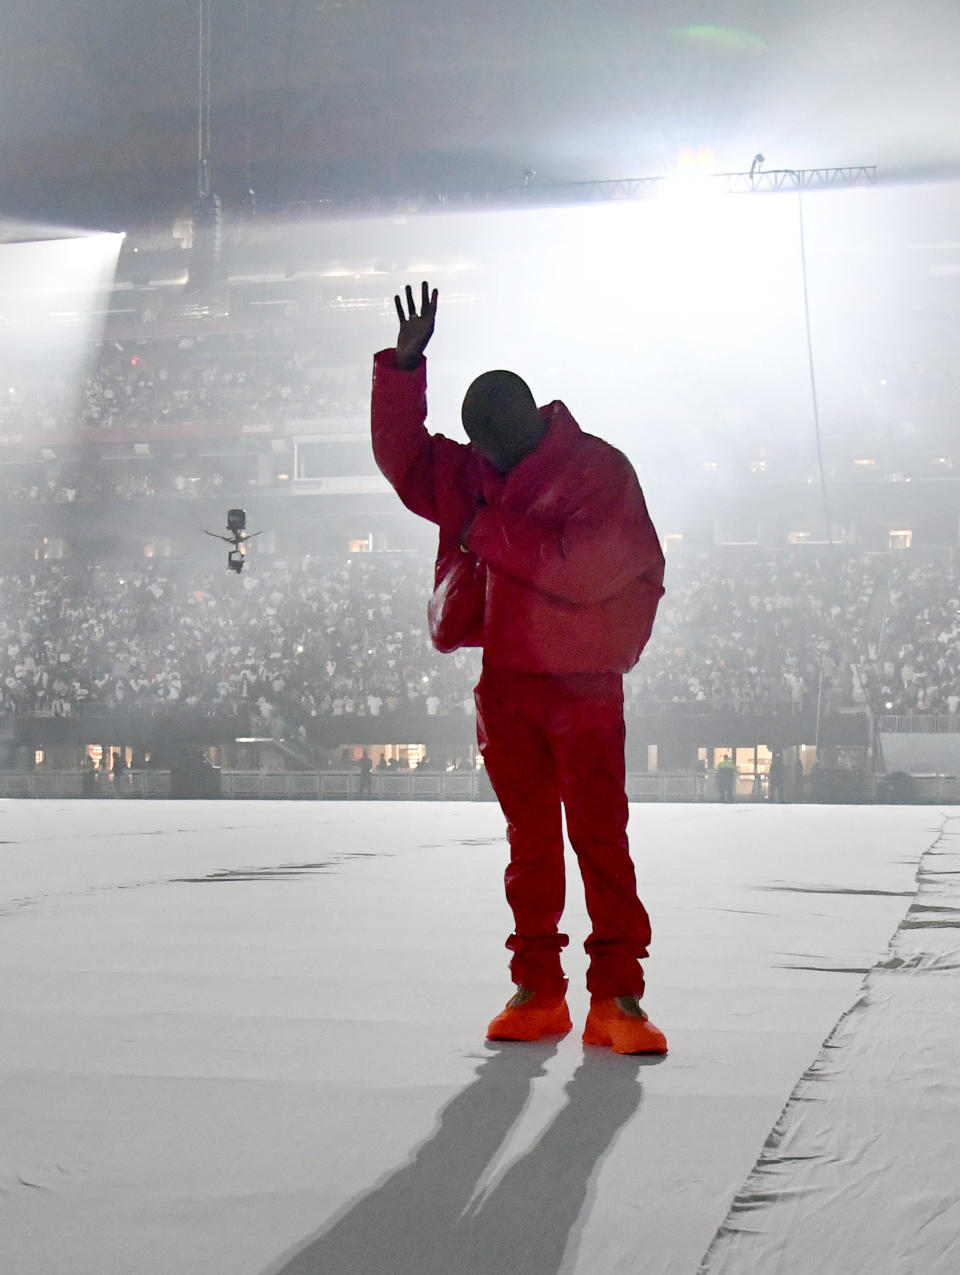 Kanye performing in a puffer jacket, matching pants and shoes, and a full face mask